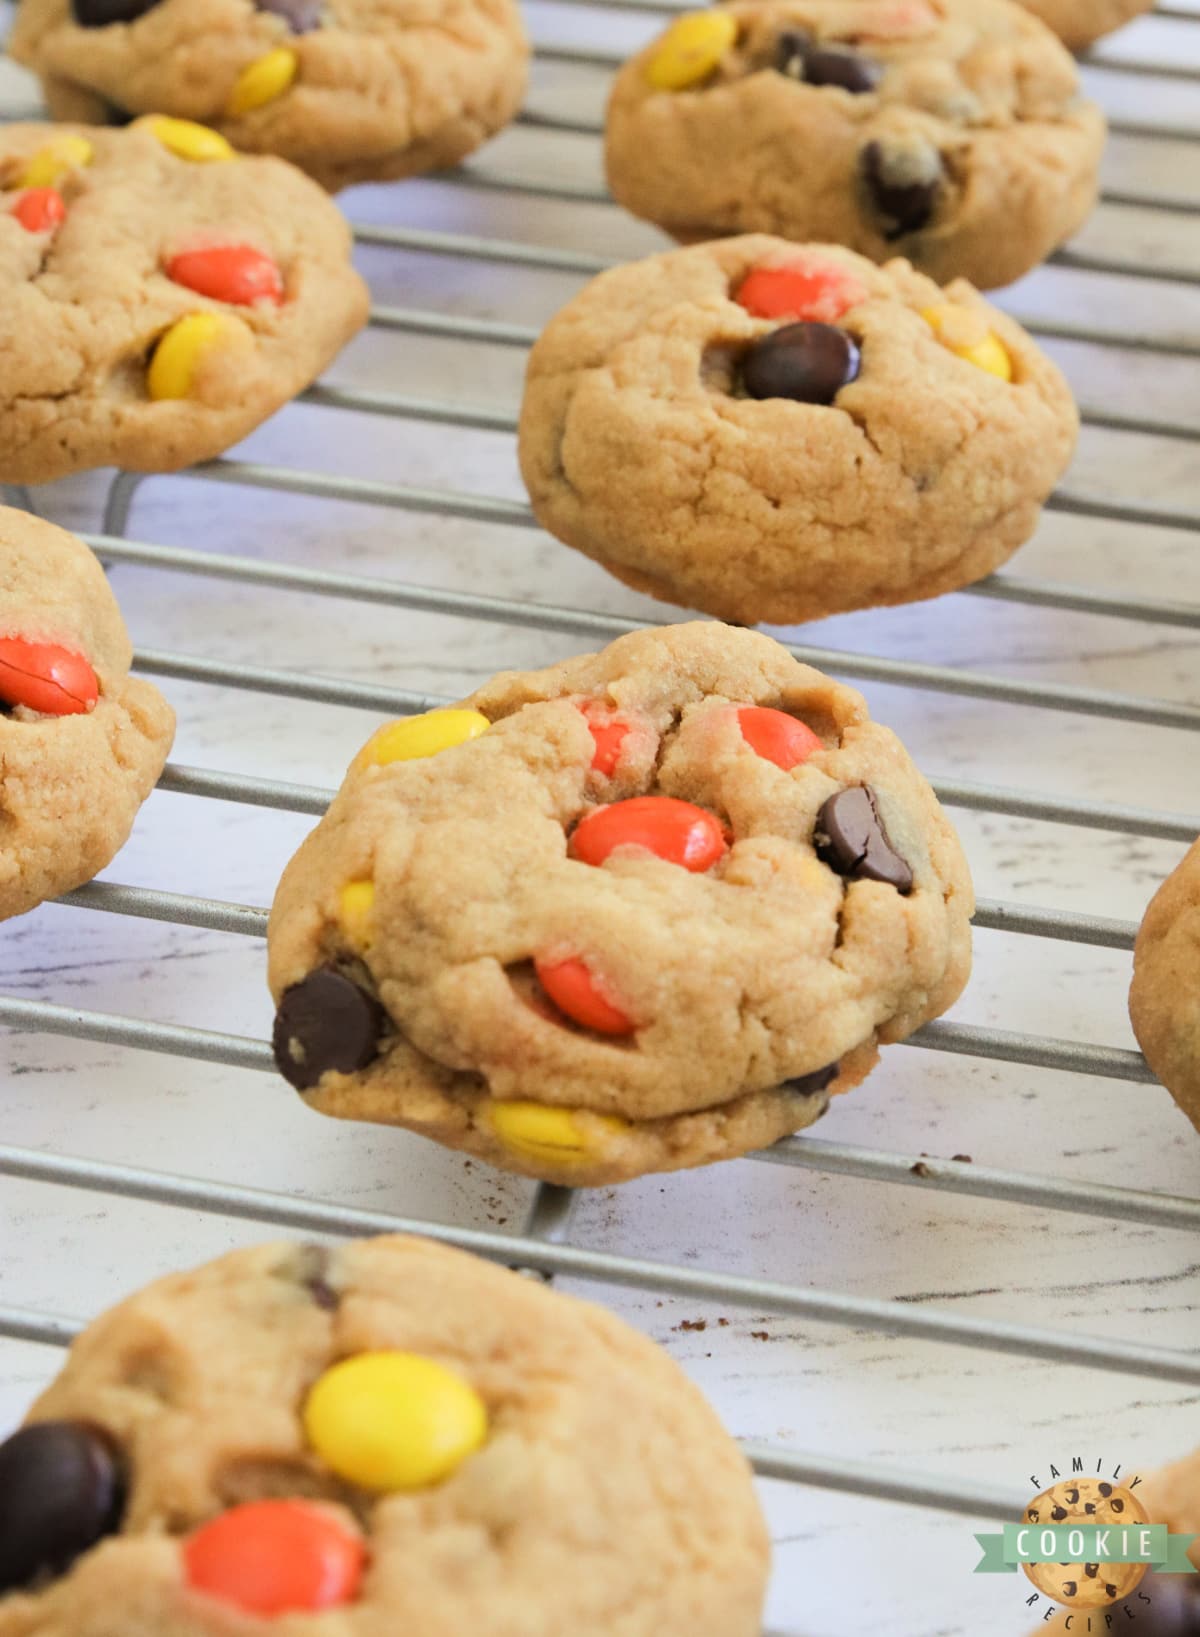 Cream cheese peanut butter cookies with Reese's pieces. 